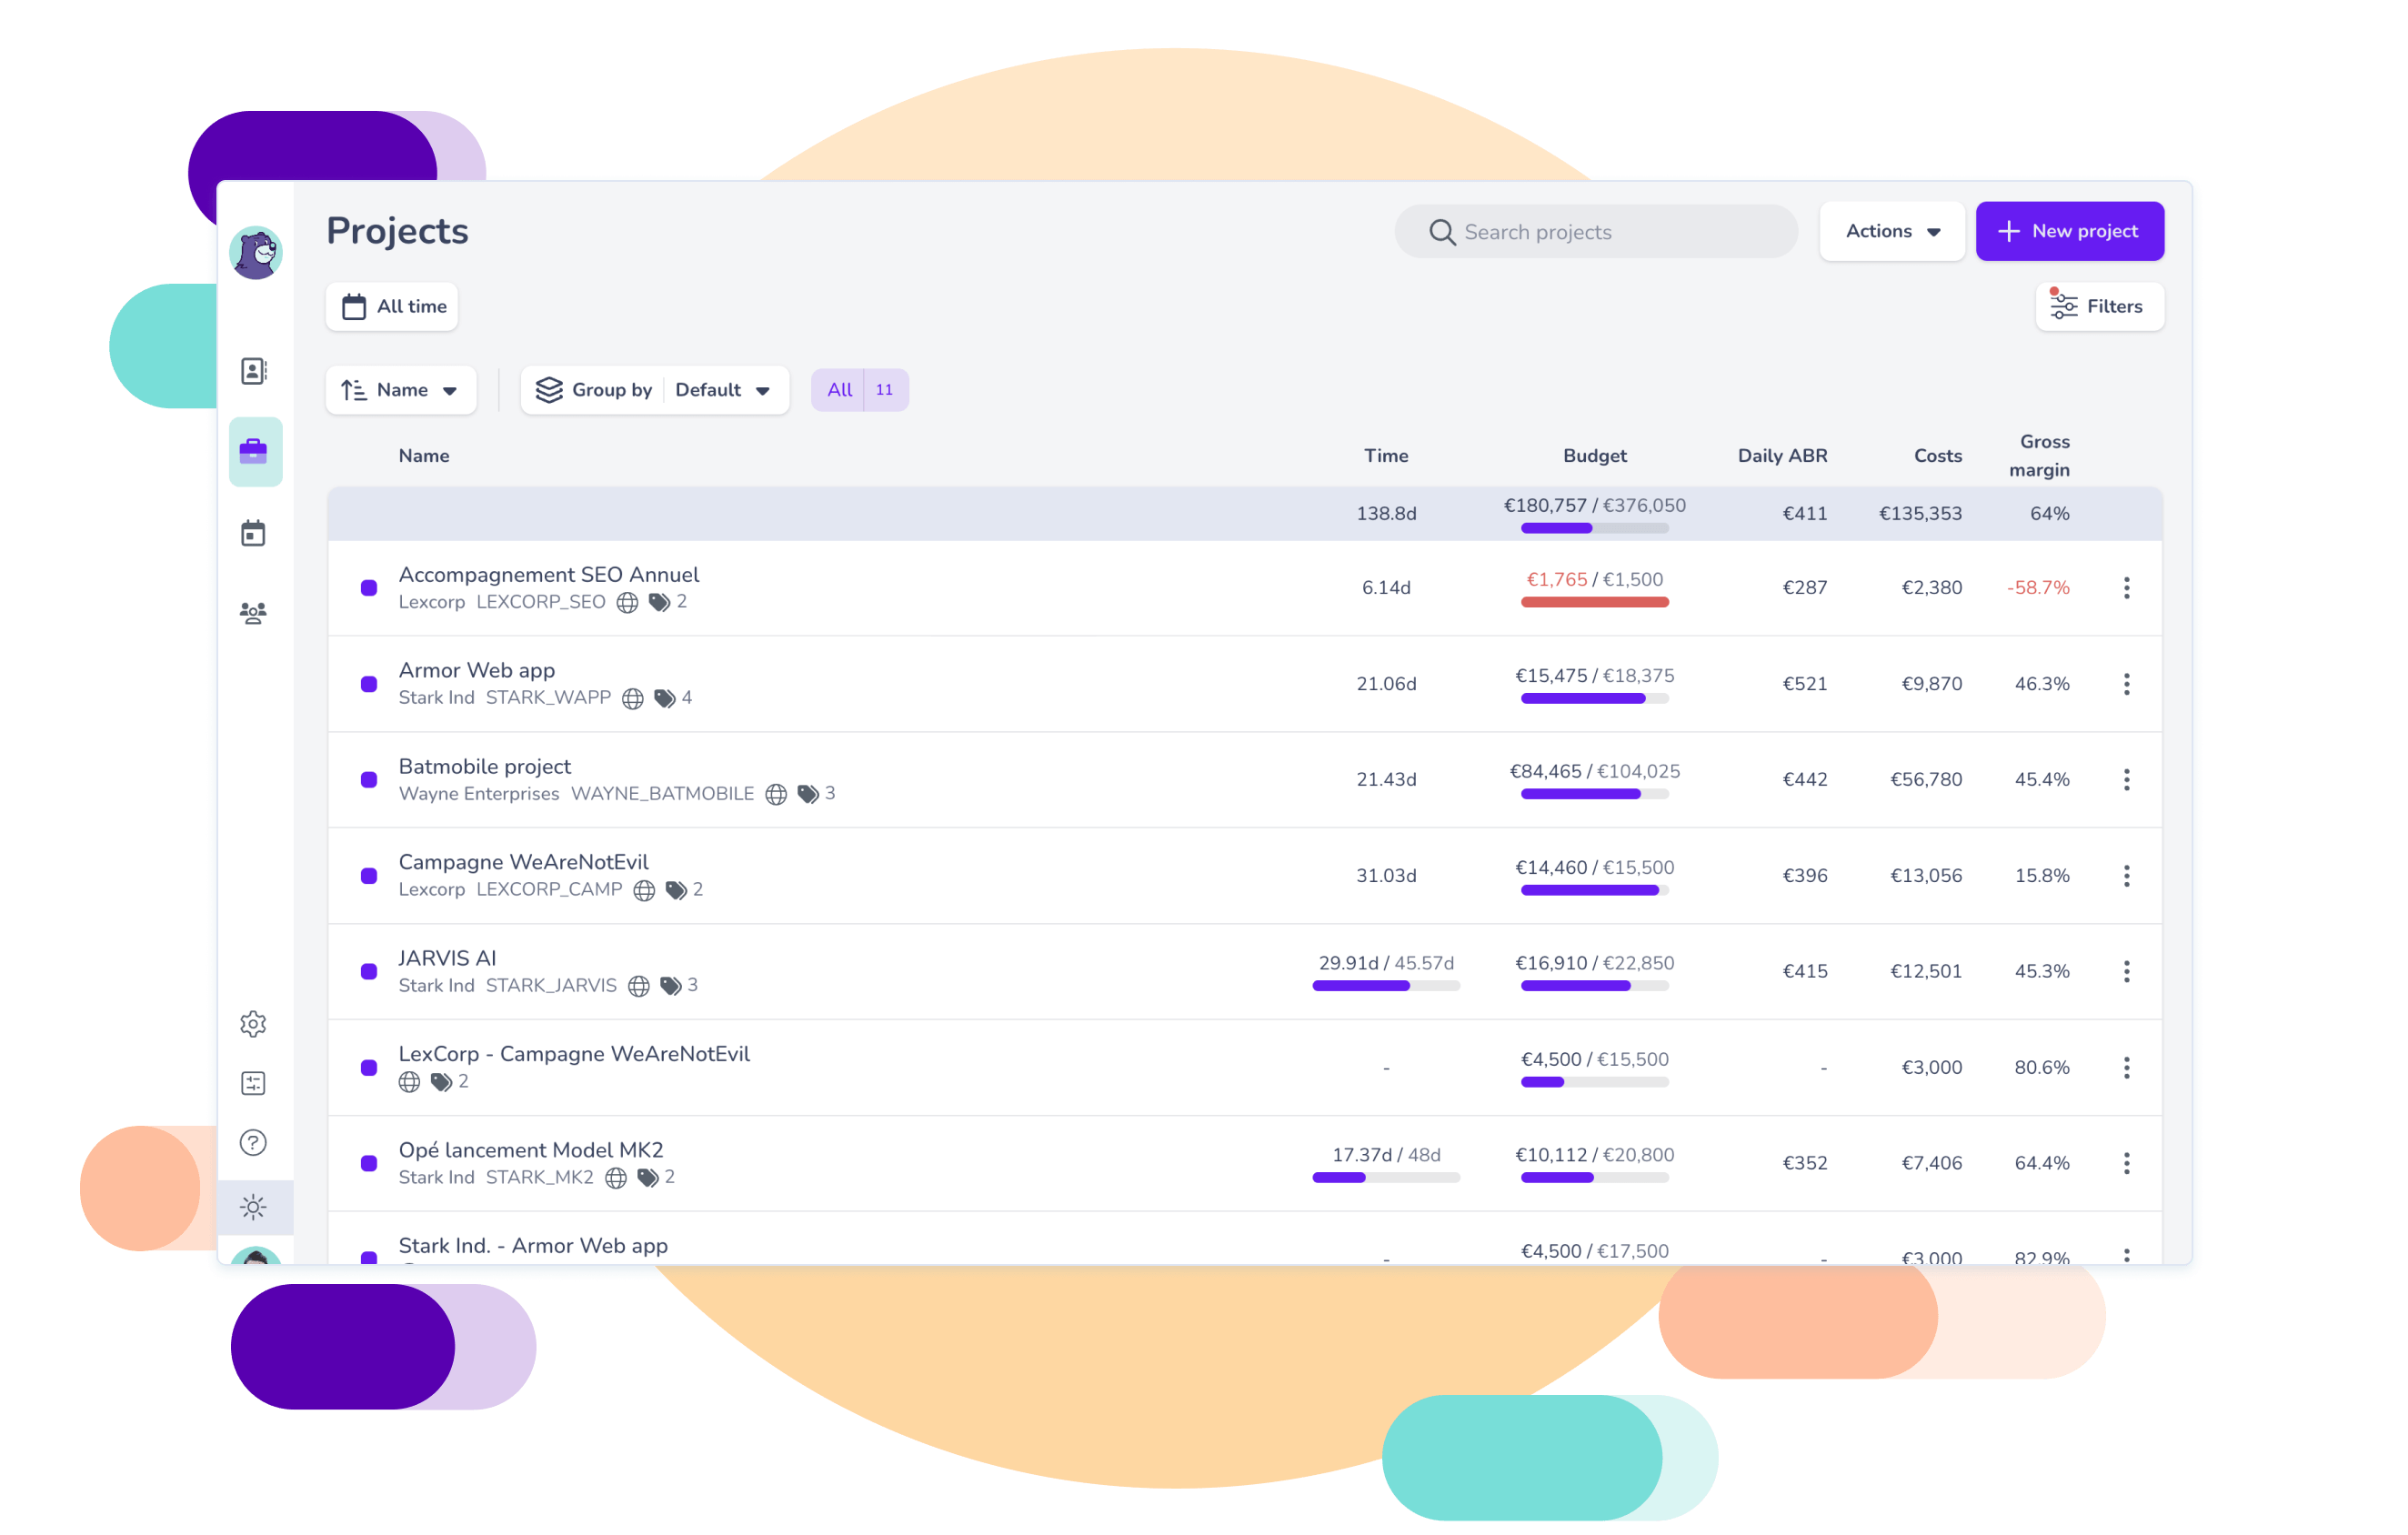 Gryzzly - Your project tracking assistant